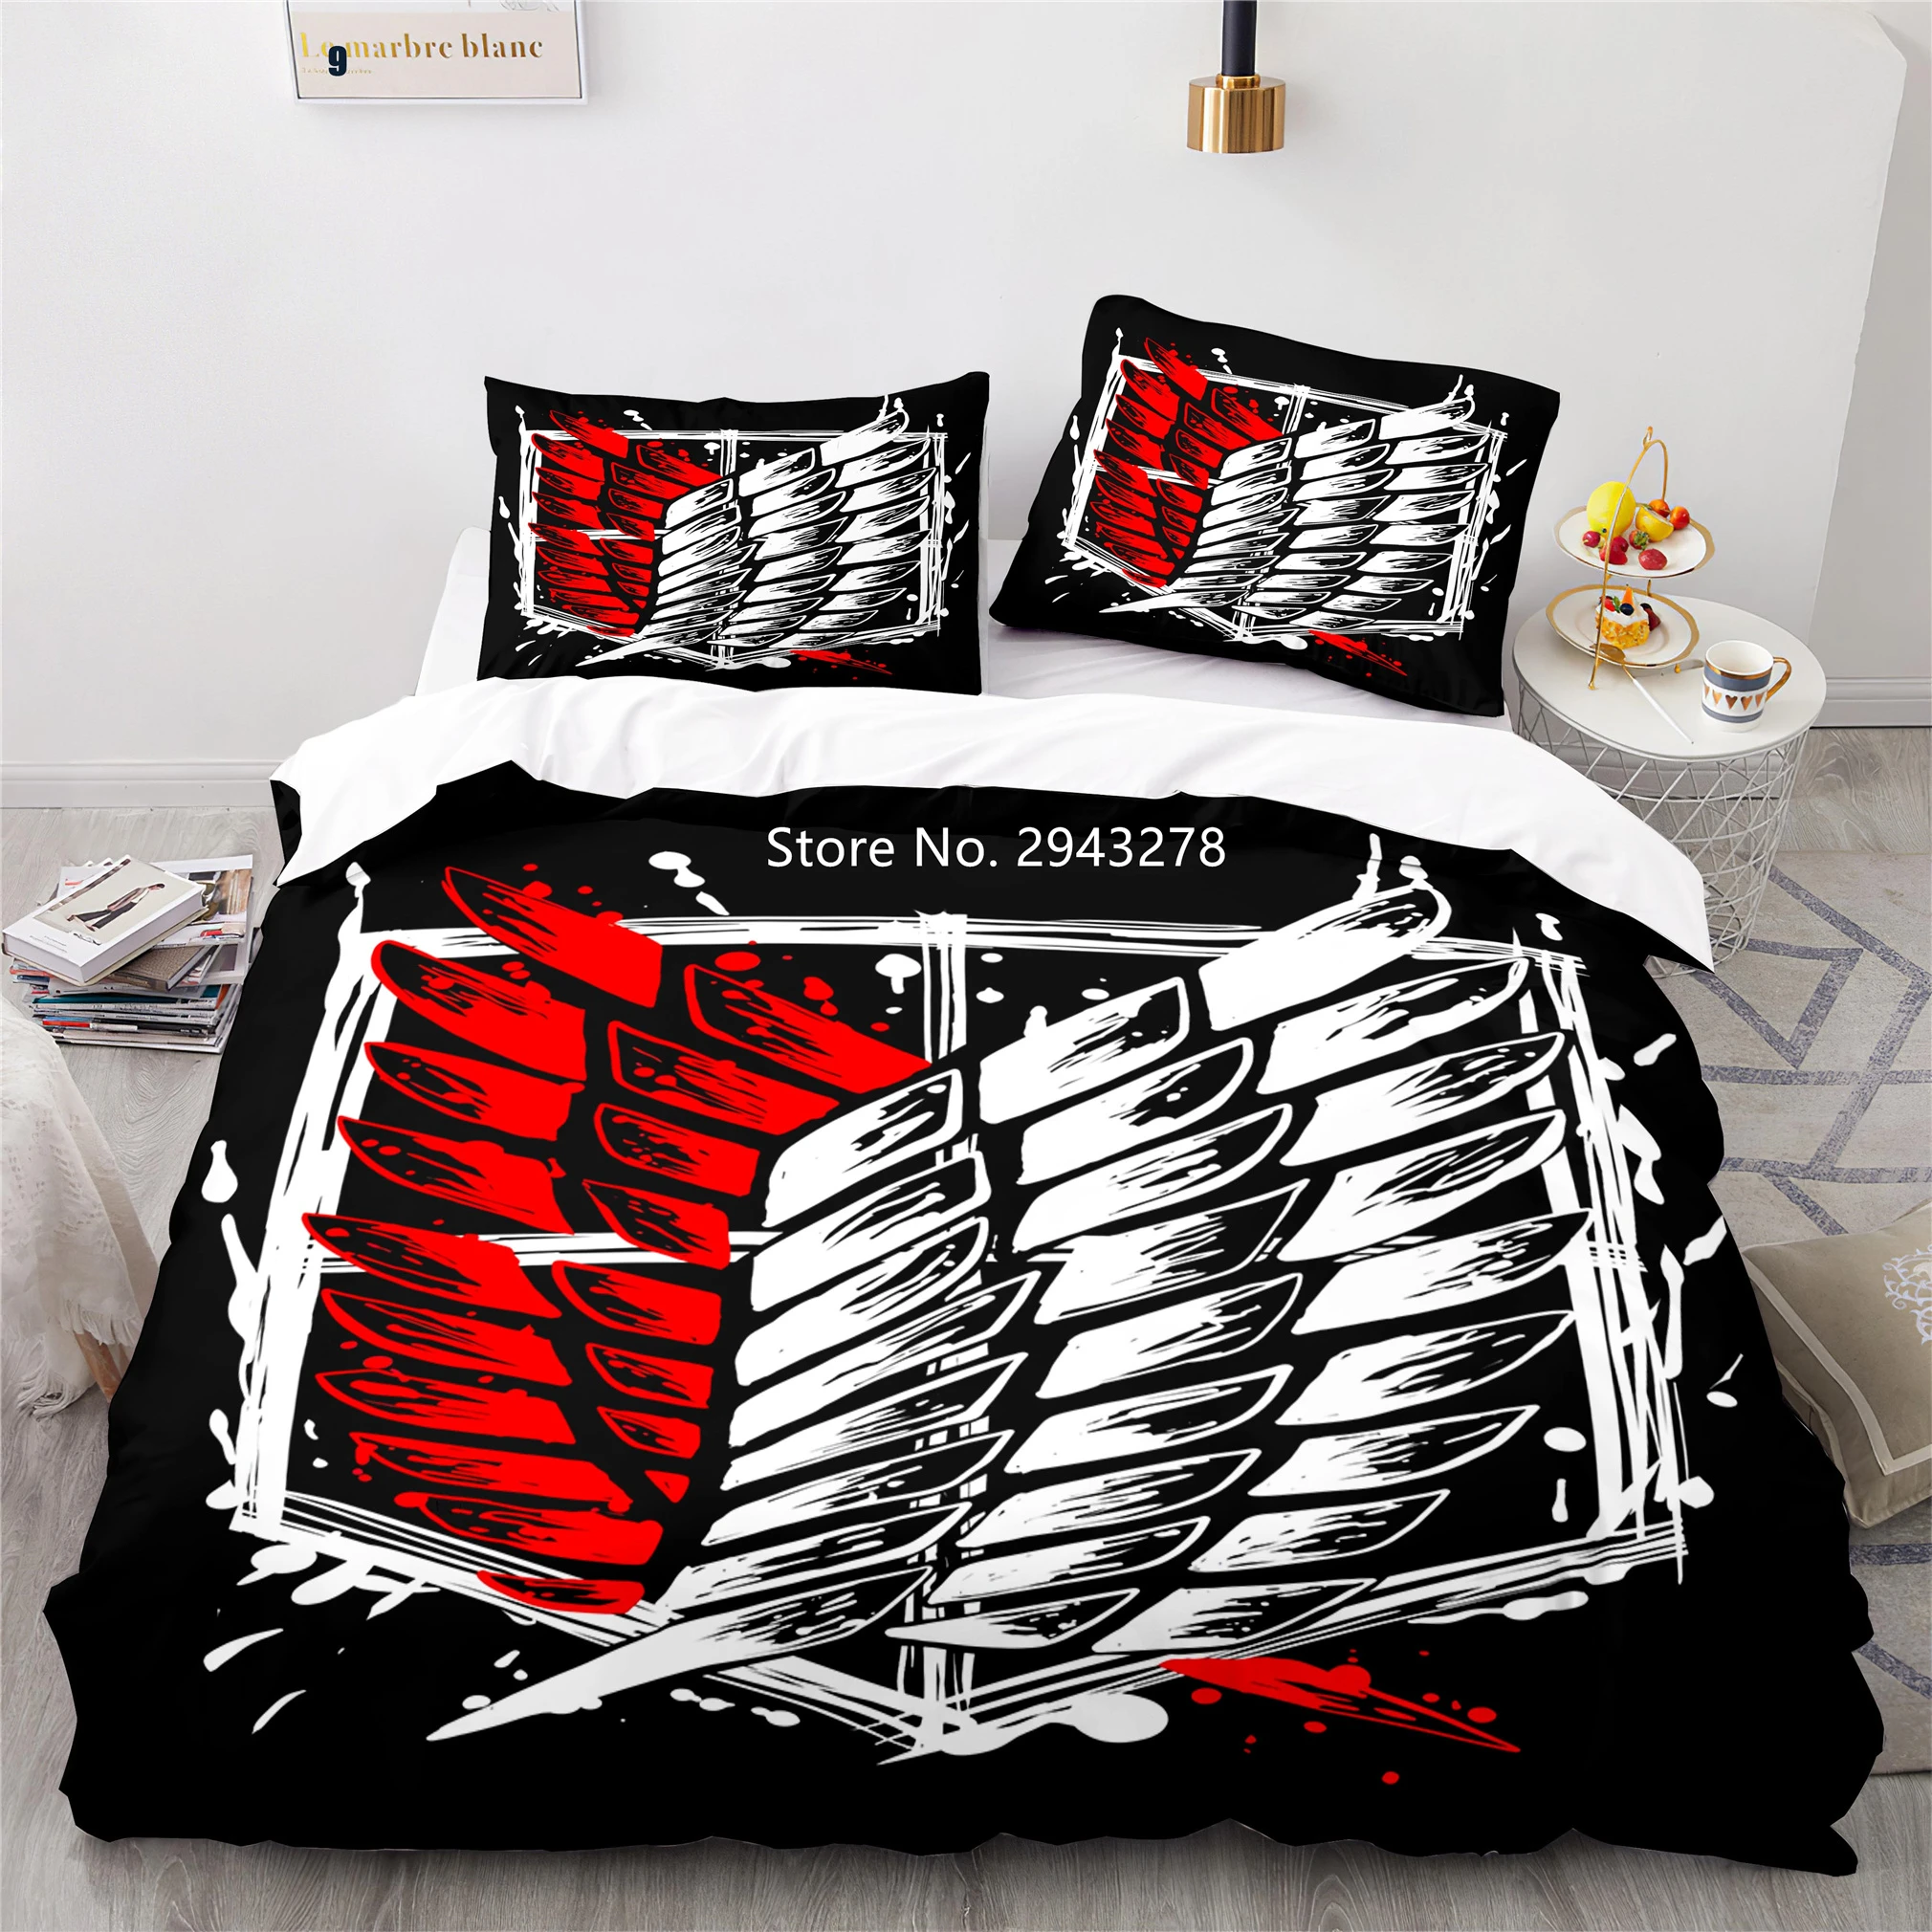 Movie Strike Giant Series Patterned Duvet Quilt Cover Pillowcase Bedding Set Teen Adult Bedroom Deluxe Decor Home Textile